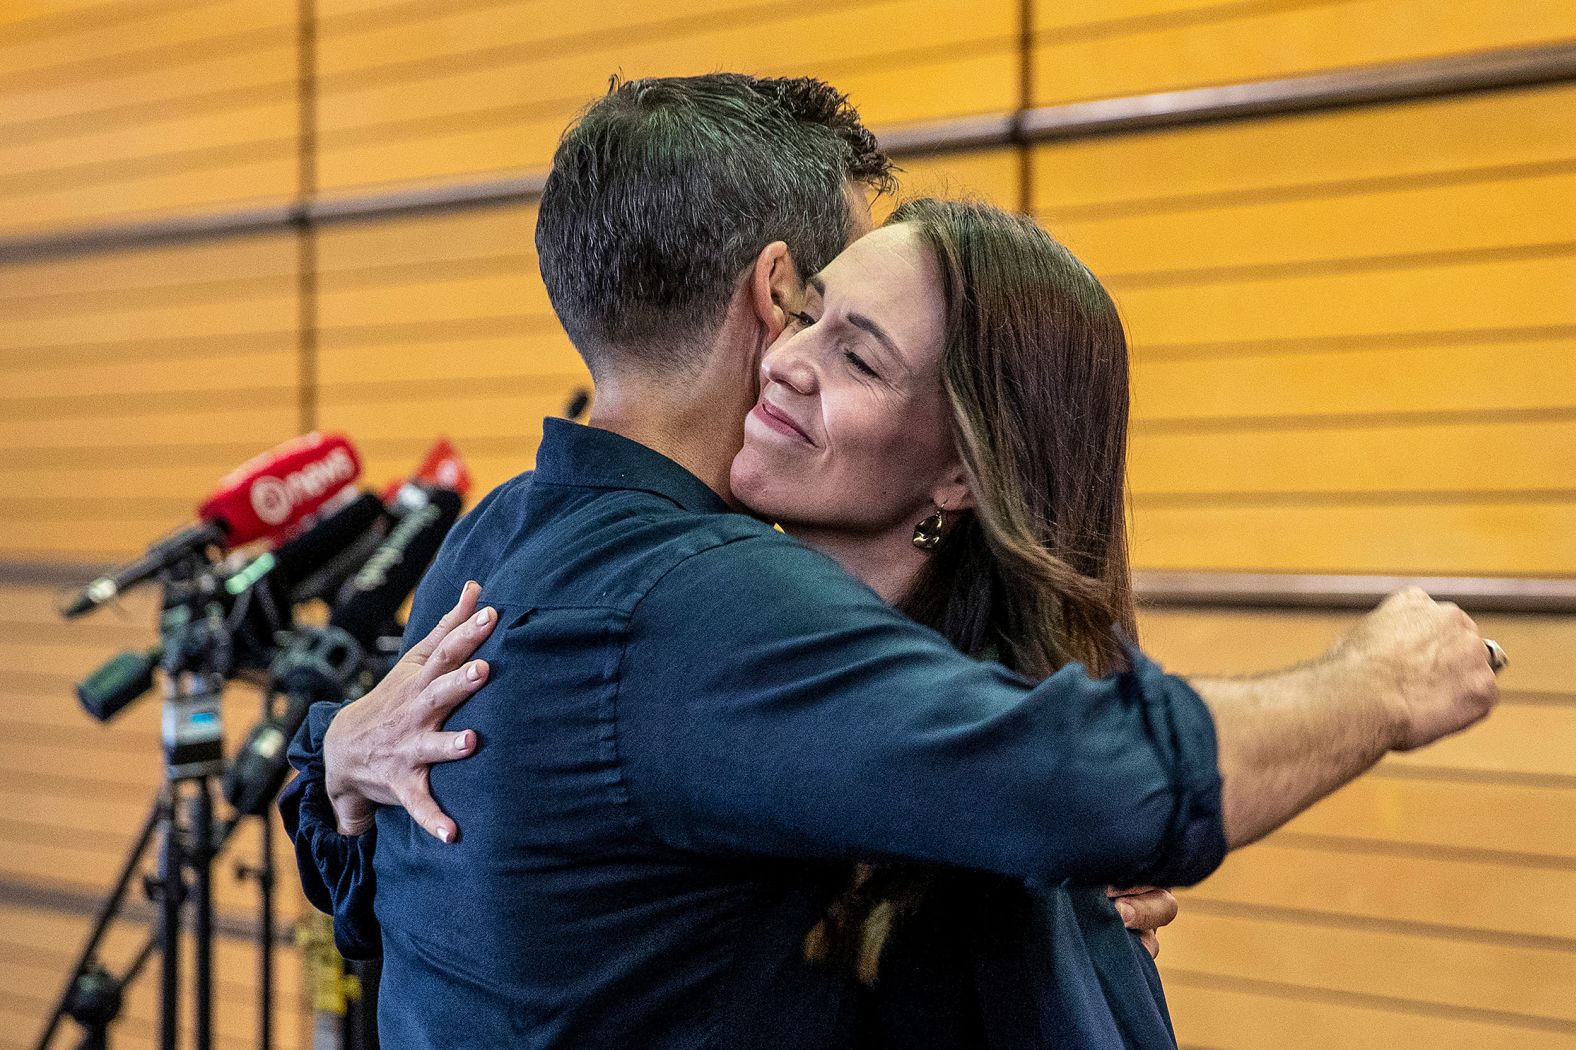 New Zealand Prime Minister Jacinda Ardern hugs her fiancée, Clark Gayford, after <a href="https://www.cnn.com/2023/01/18/asia/new-zealand-jacinda-ardern-not-seeking-reelection-intl-hnk/index.html" target="_blank">announcing her resignation</a> at a news conference in Napier, New Zealand, on Thursday, January 19. Ardern told reporters that February 7 will be her last day in office, saying she doesn't believe she has the energy to seek re-election in October.